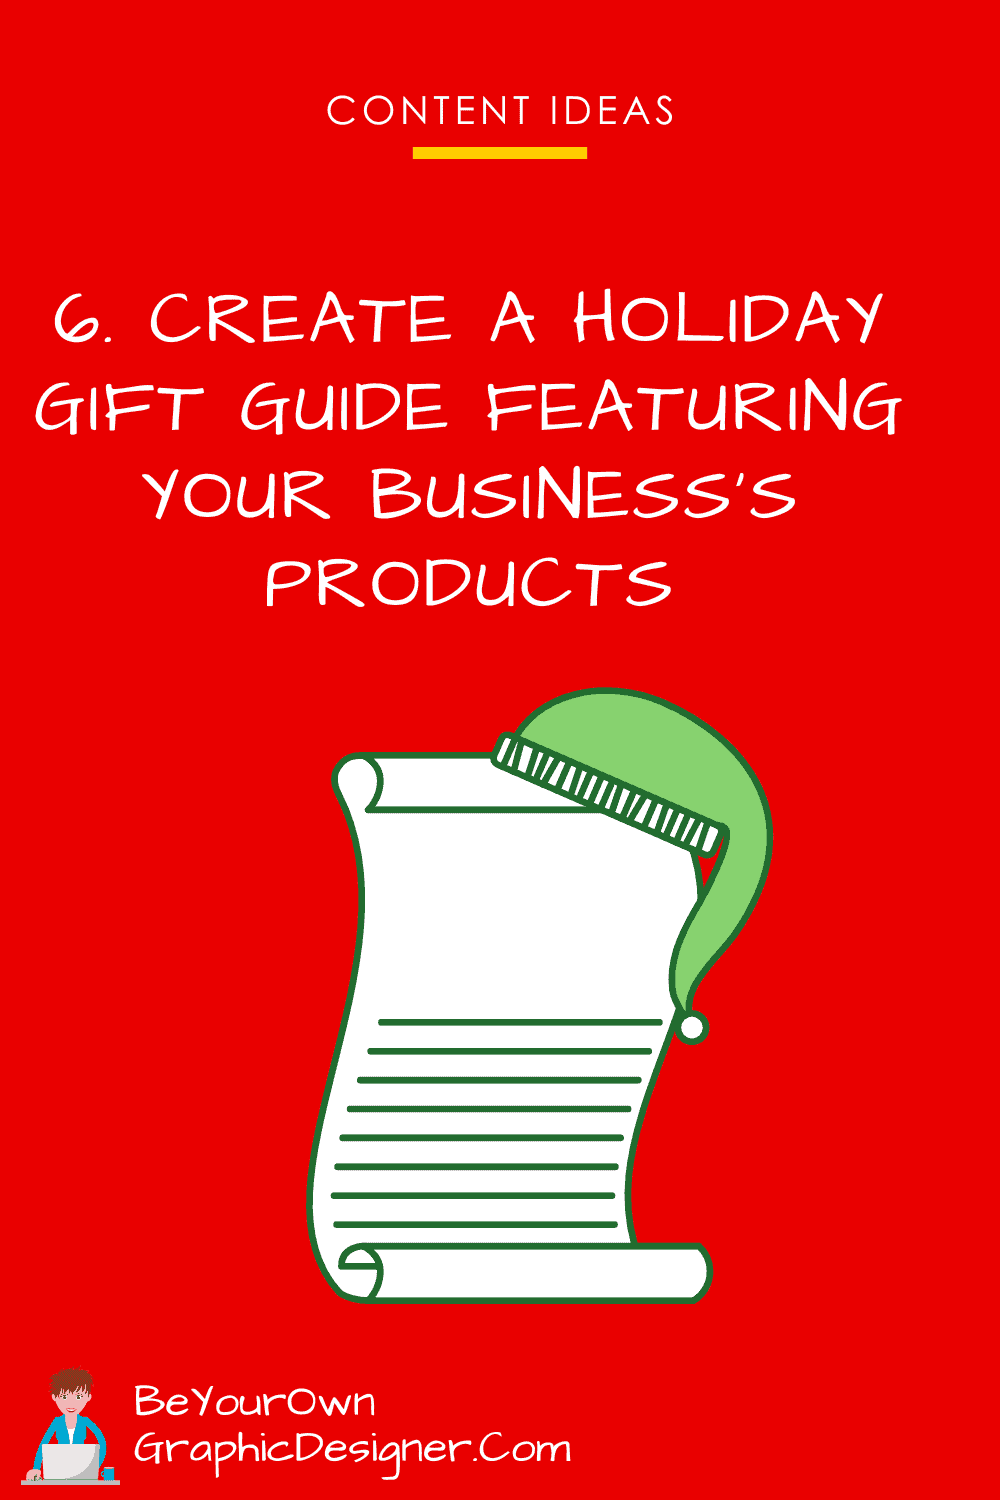 December Content Ideas- Create a holiday gift guide featuring your business’s products